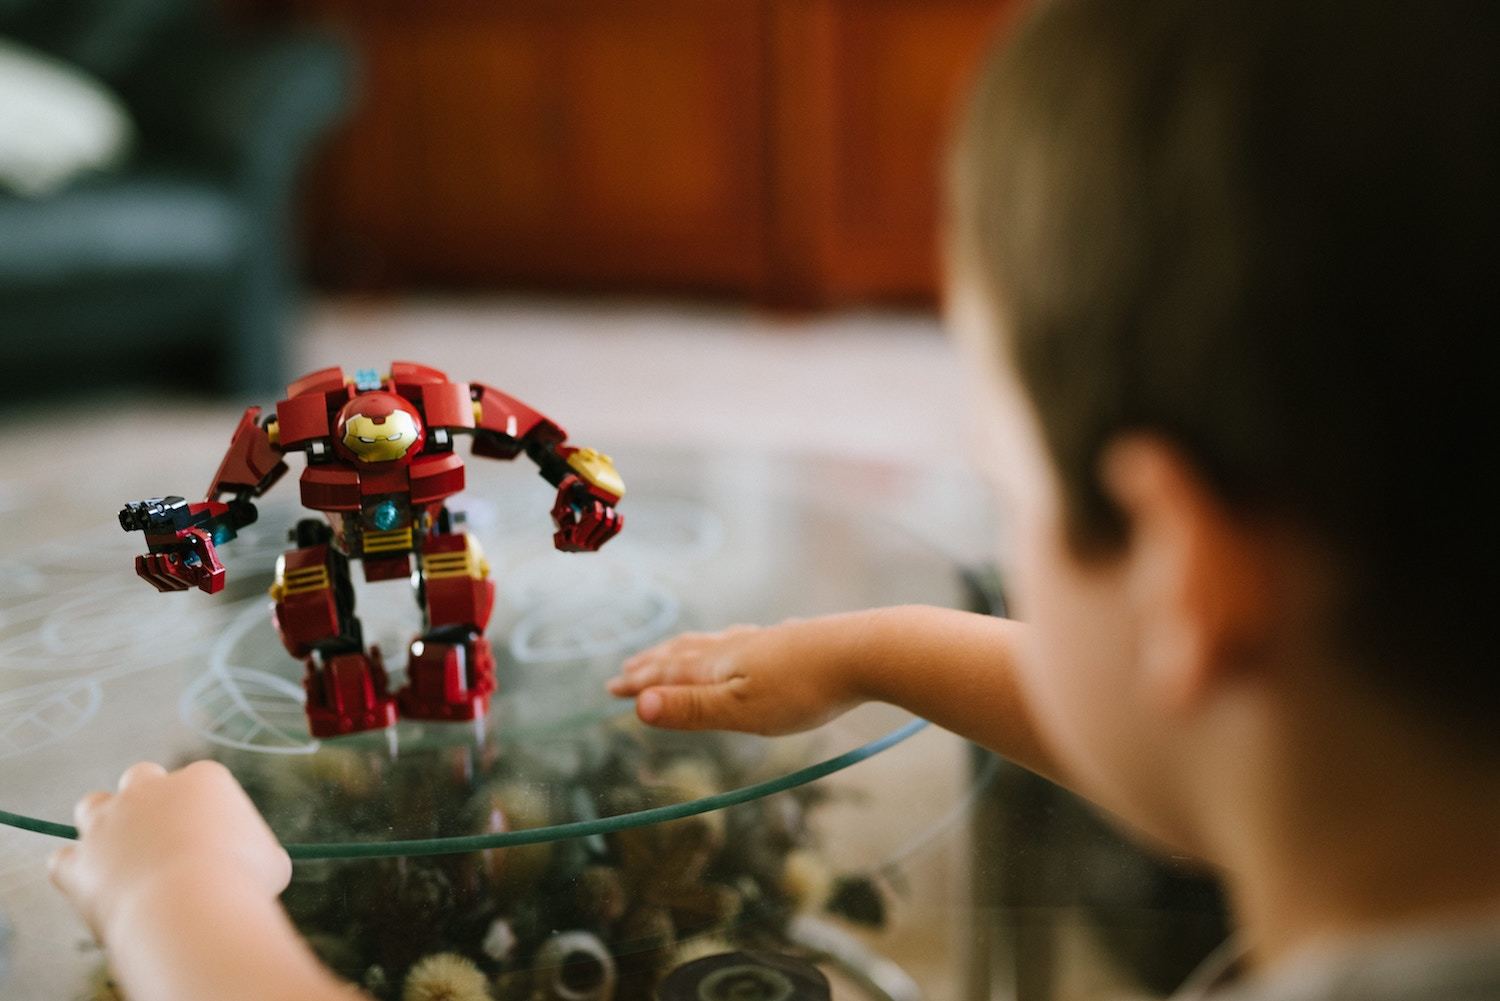 An Iron Man toy sits on a table